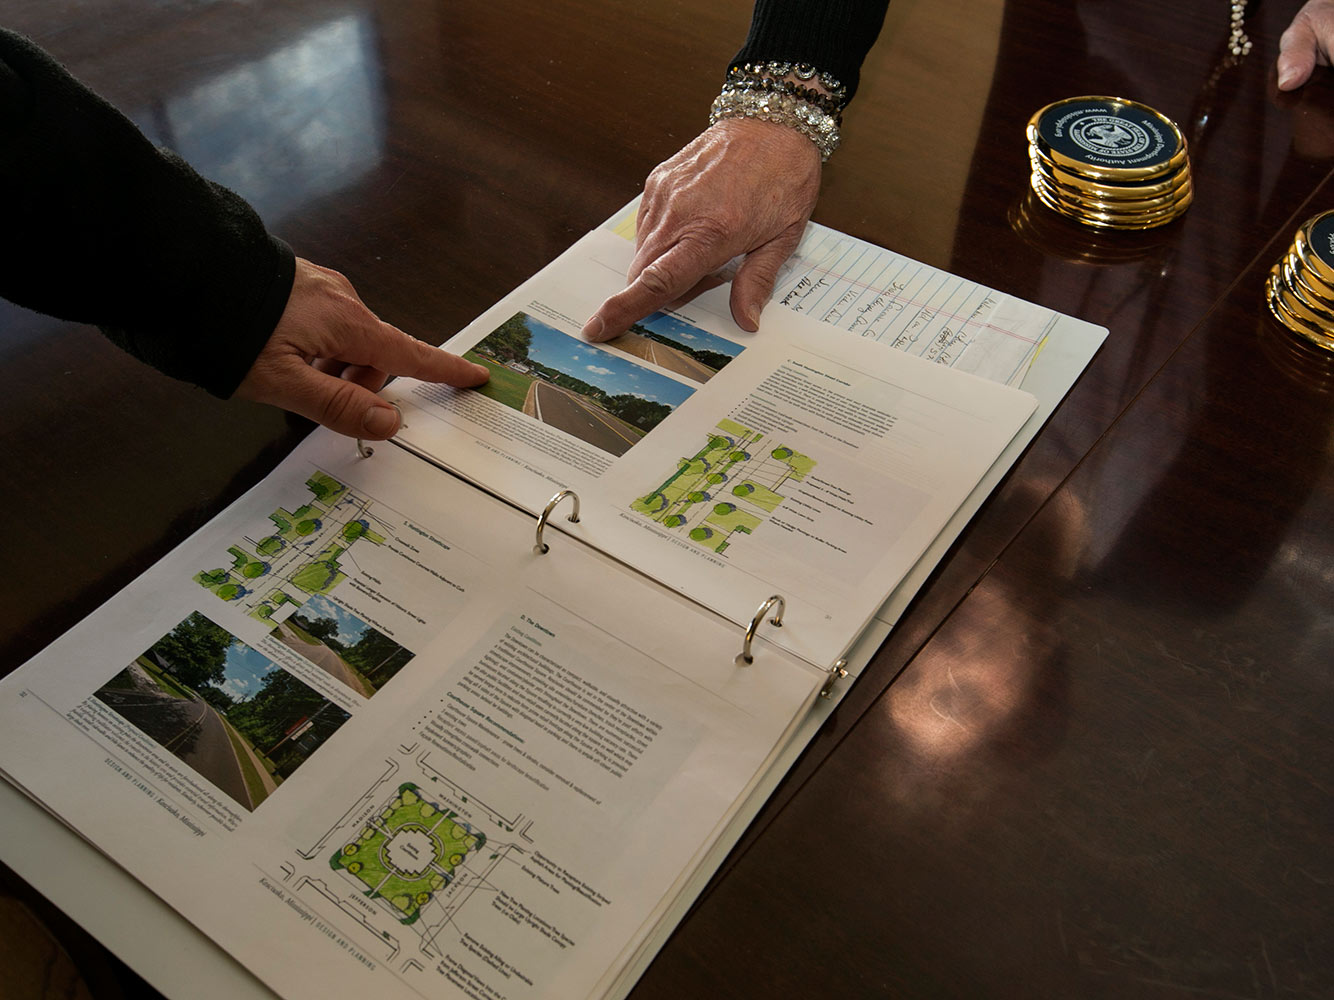 A binder with plans for the city is open on a table, and tow hands are pointing at a picture of a road in the binder.